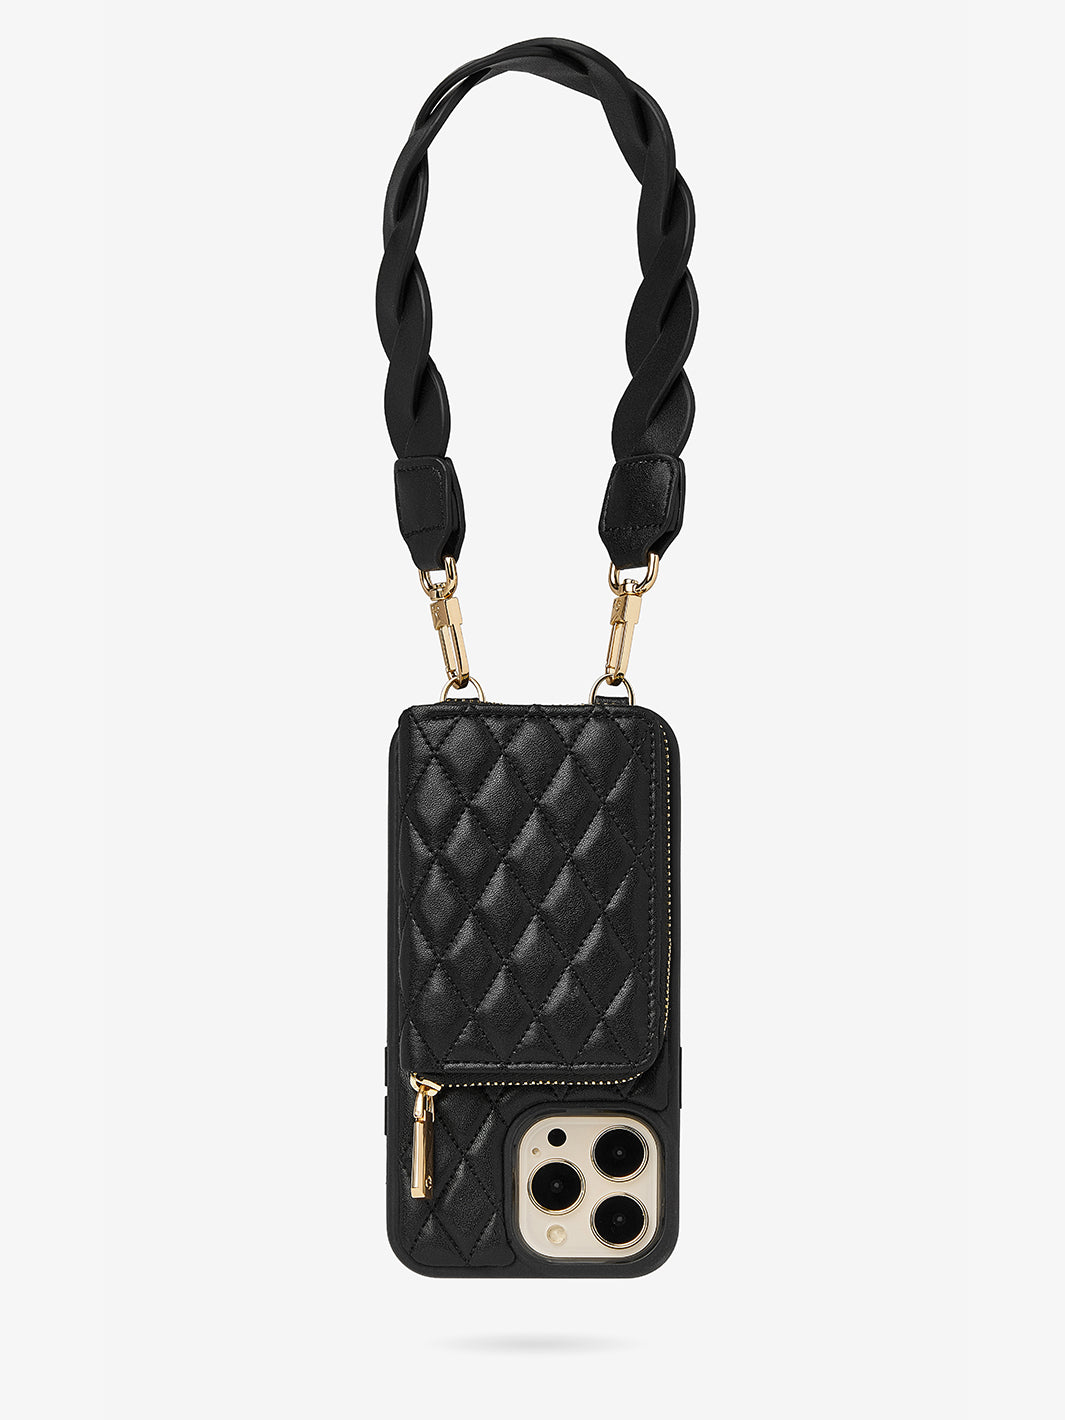 Chanel Gift Cases for iPhone all Variant